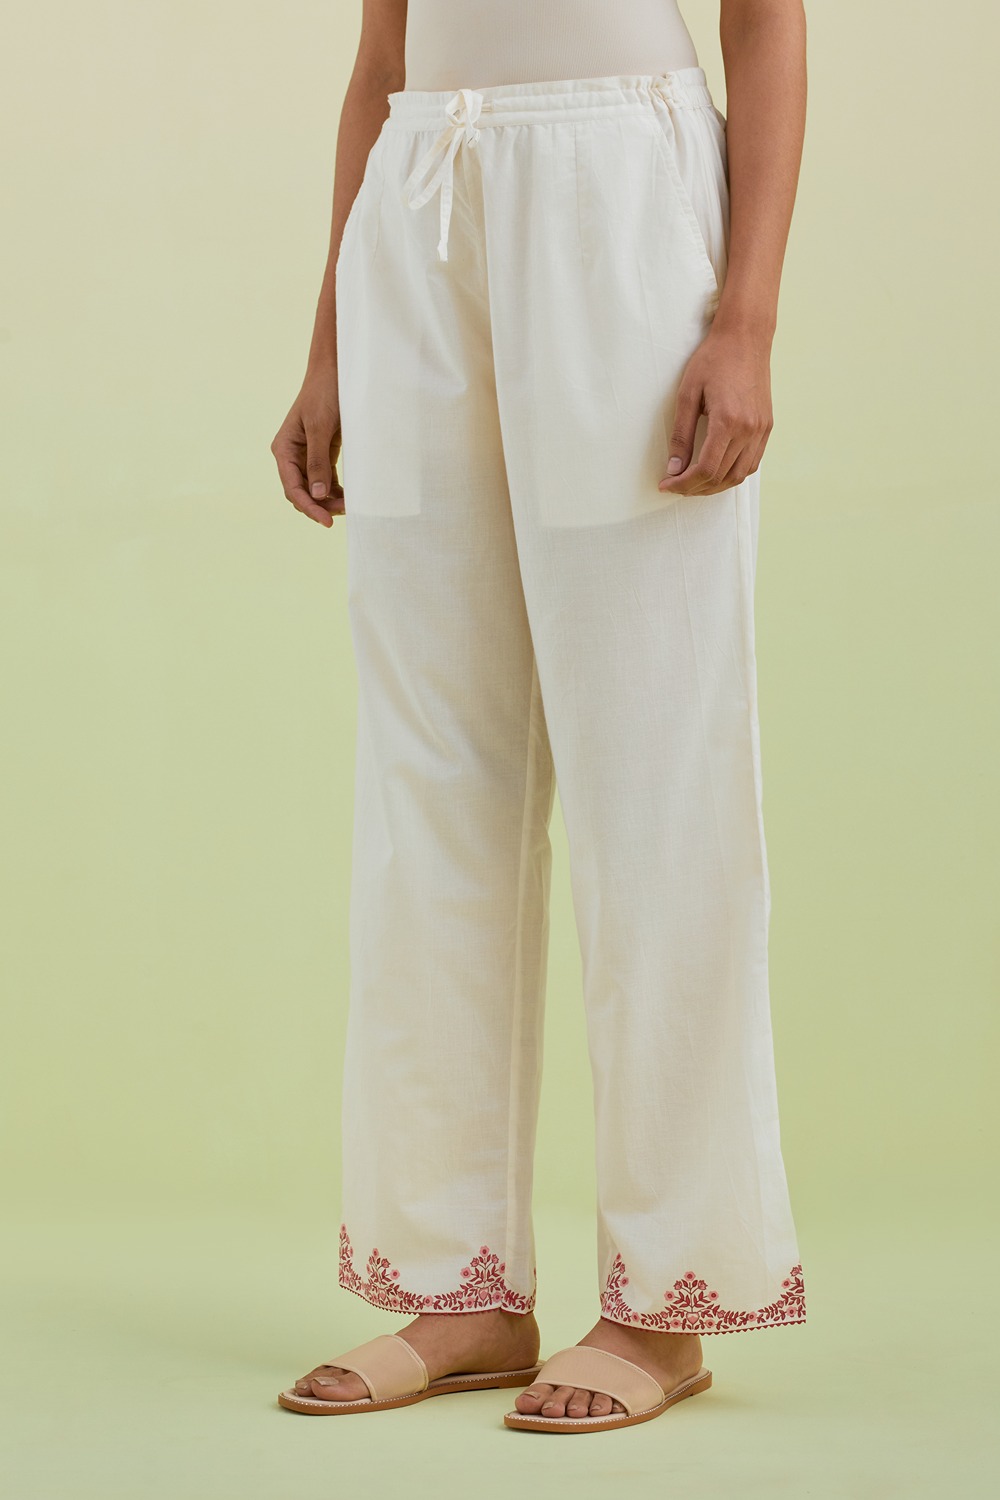 Off White Straight Pants With Pink Colored Hand-Block Printed Border At Hem